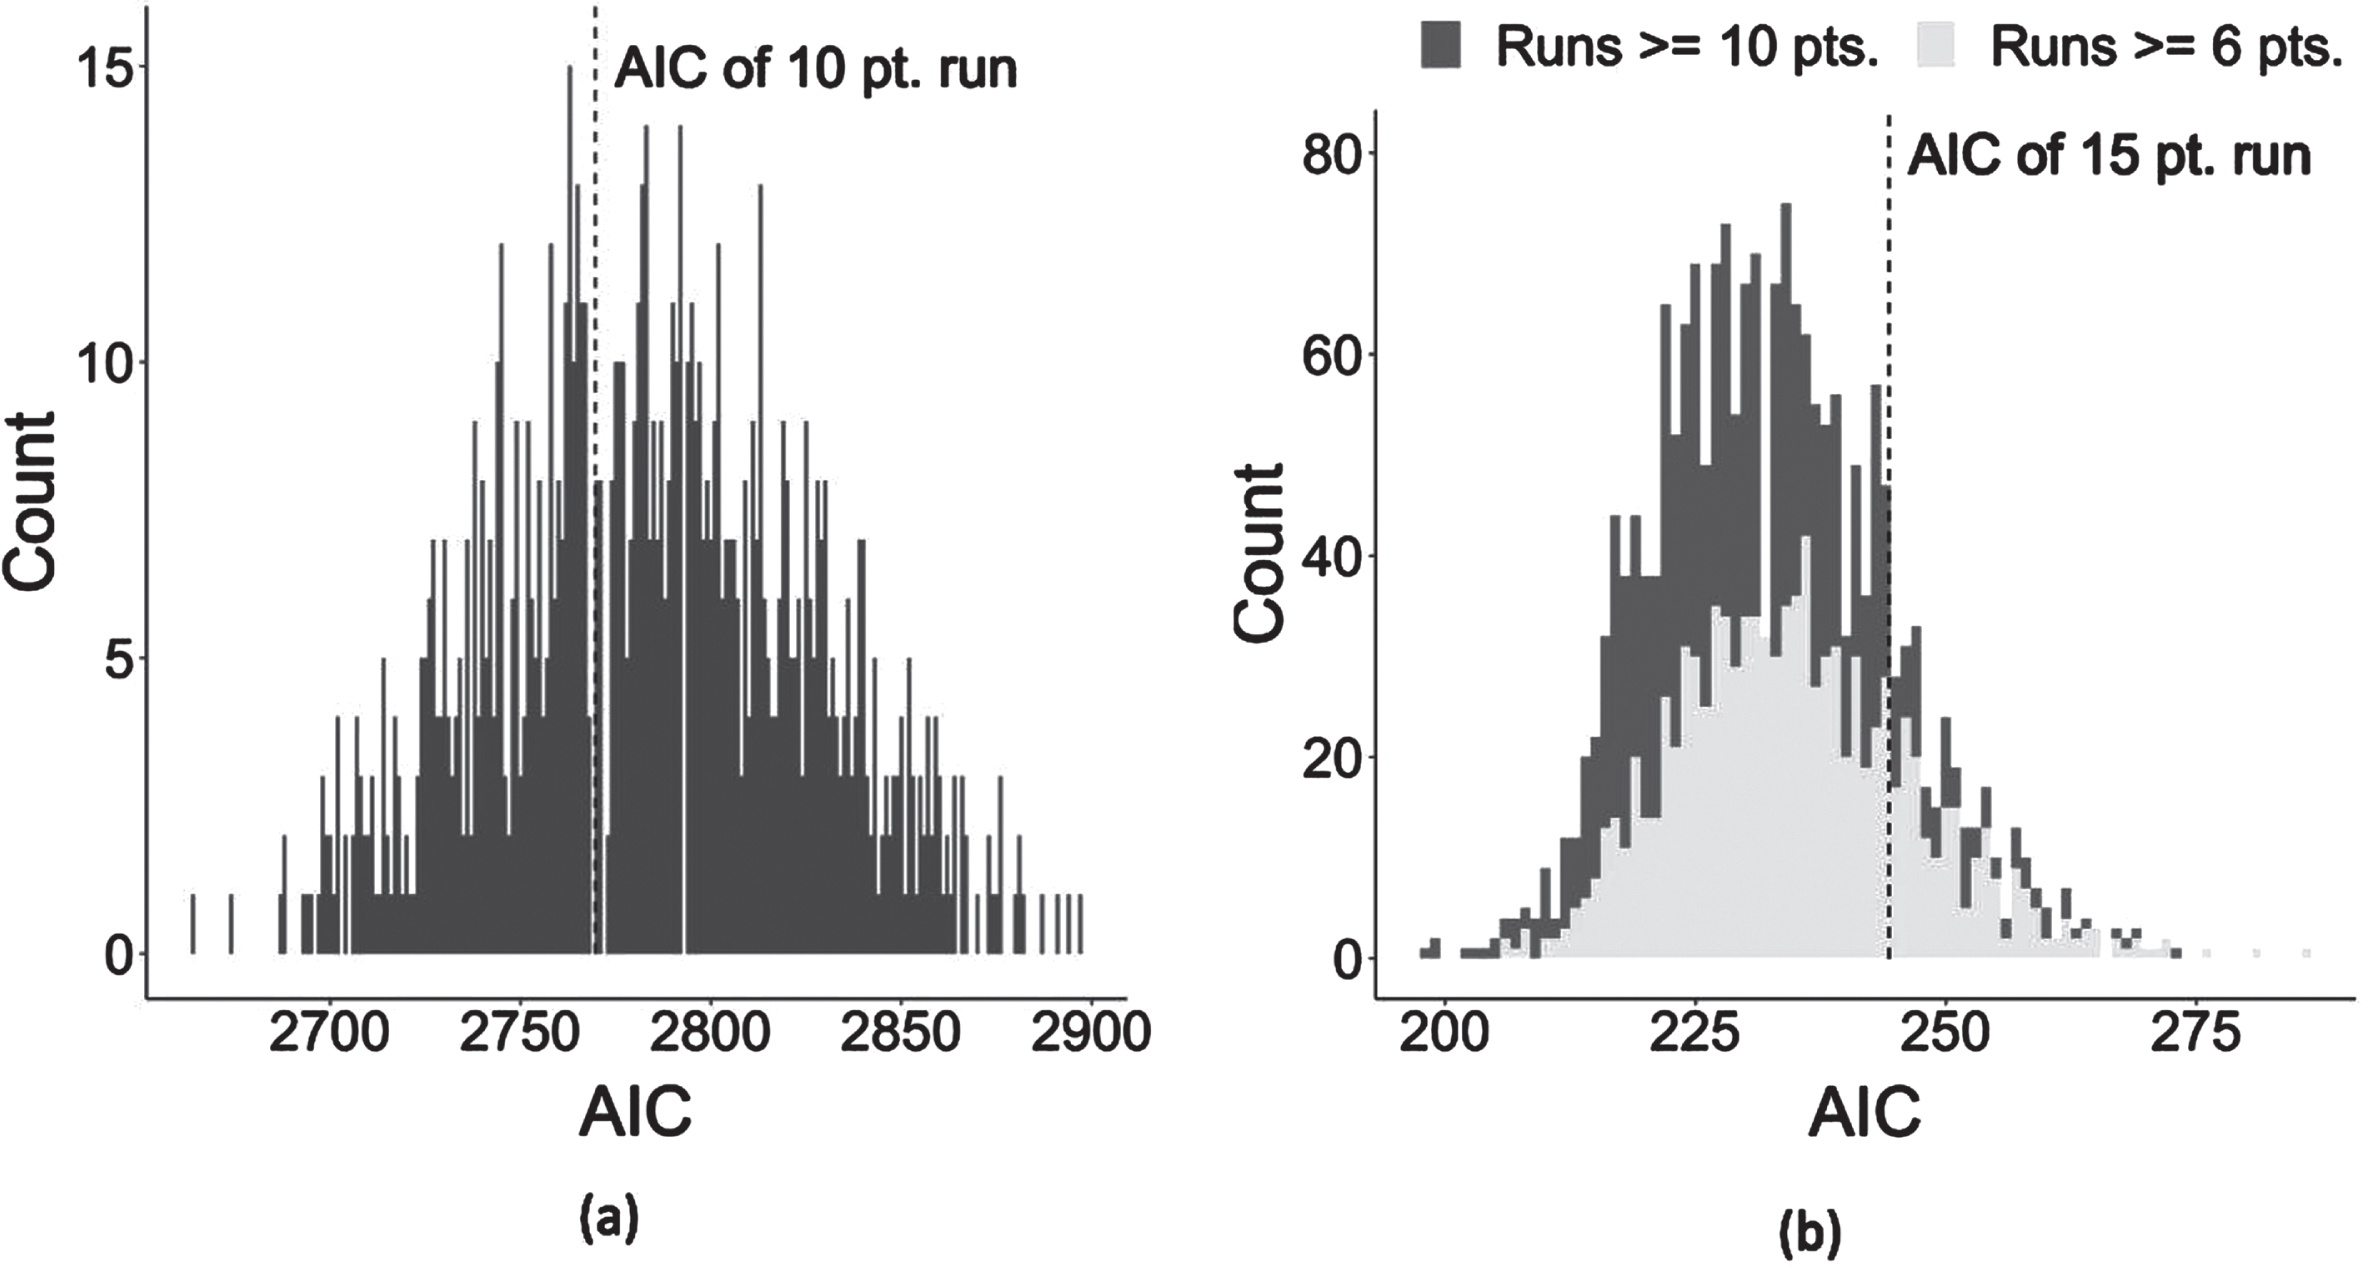 Comparing Model Fit for Runs of at Least 6, 10, or 15 Points. (a) compares the AIC of 1,000 samples of size 576, the number of observations for runs of at least ten points, for runs of at least six points. (b) does the same but the sample size is 48, the number of observations for runs of at least 15 points. The dashed line is the AIC of the comparison model, and a lower AIC is better. By forcing samples of different run lengths to have the same number of observations, the results are directly comparable. (a) shows that TV timeouts explain equally well the change in momentum for runs of at least six or at least ten points, and (b) shows runs of 6 and 10 points better fit the data than runs of at least 15 points.